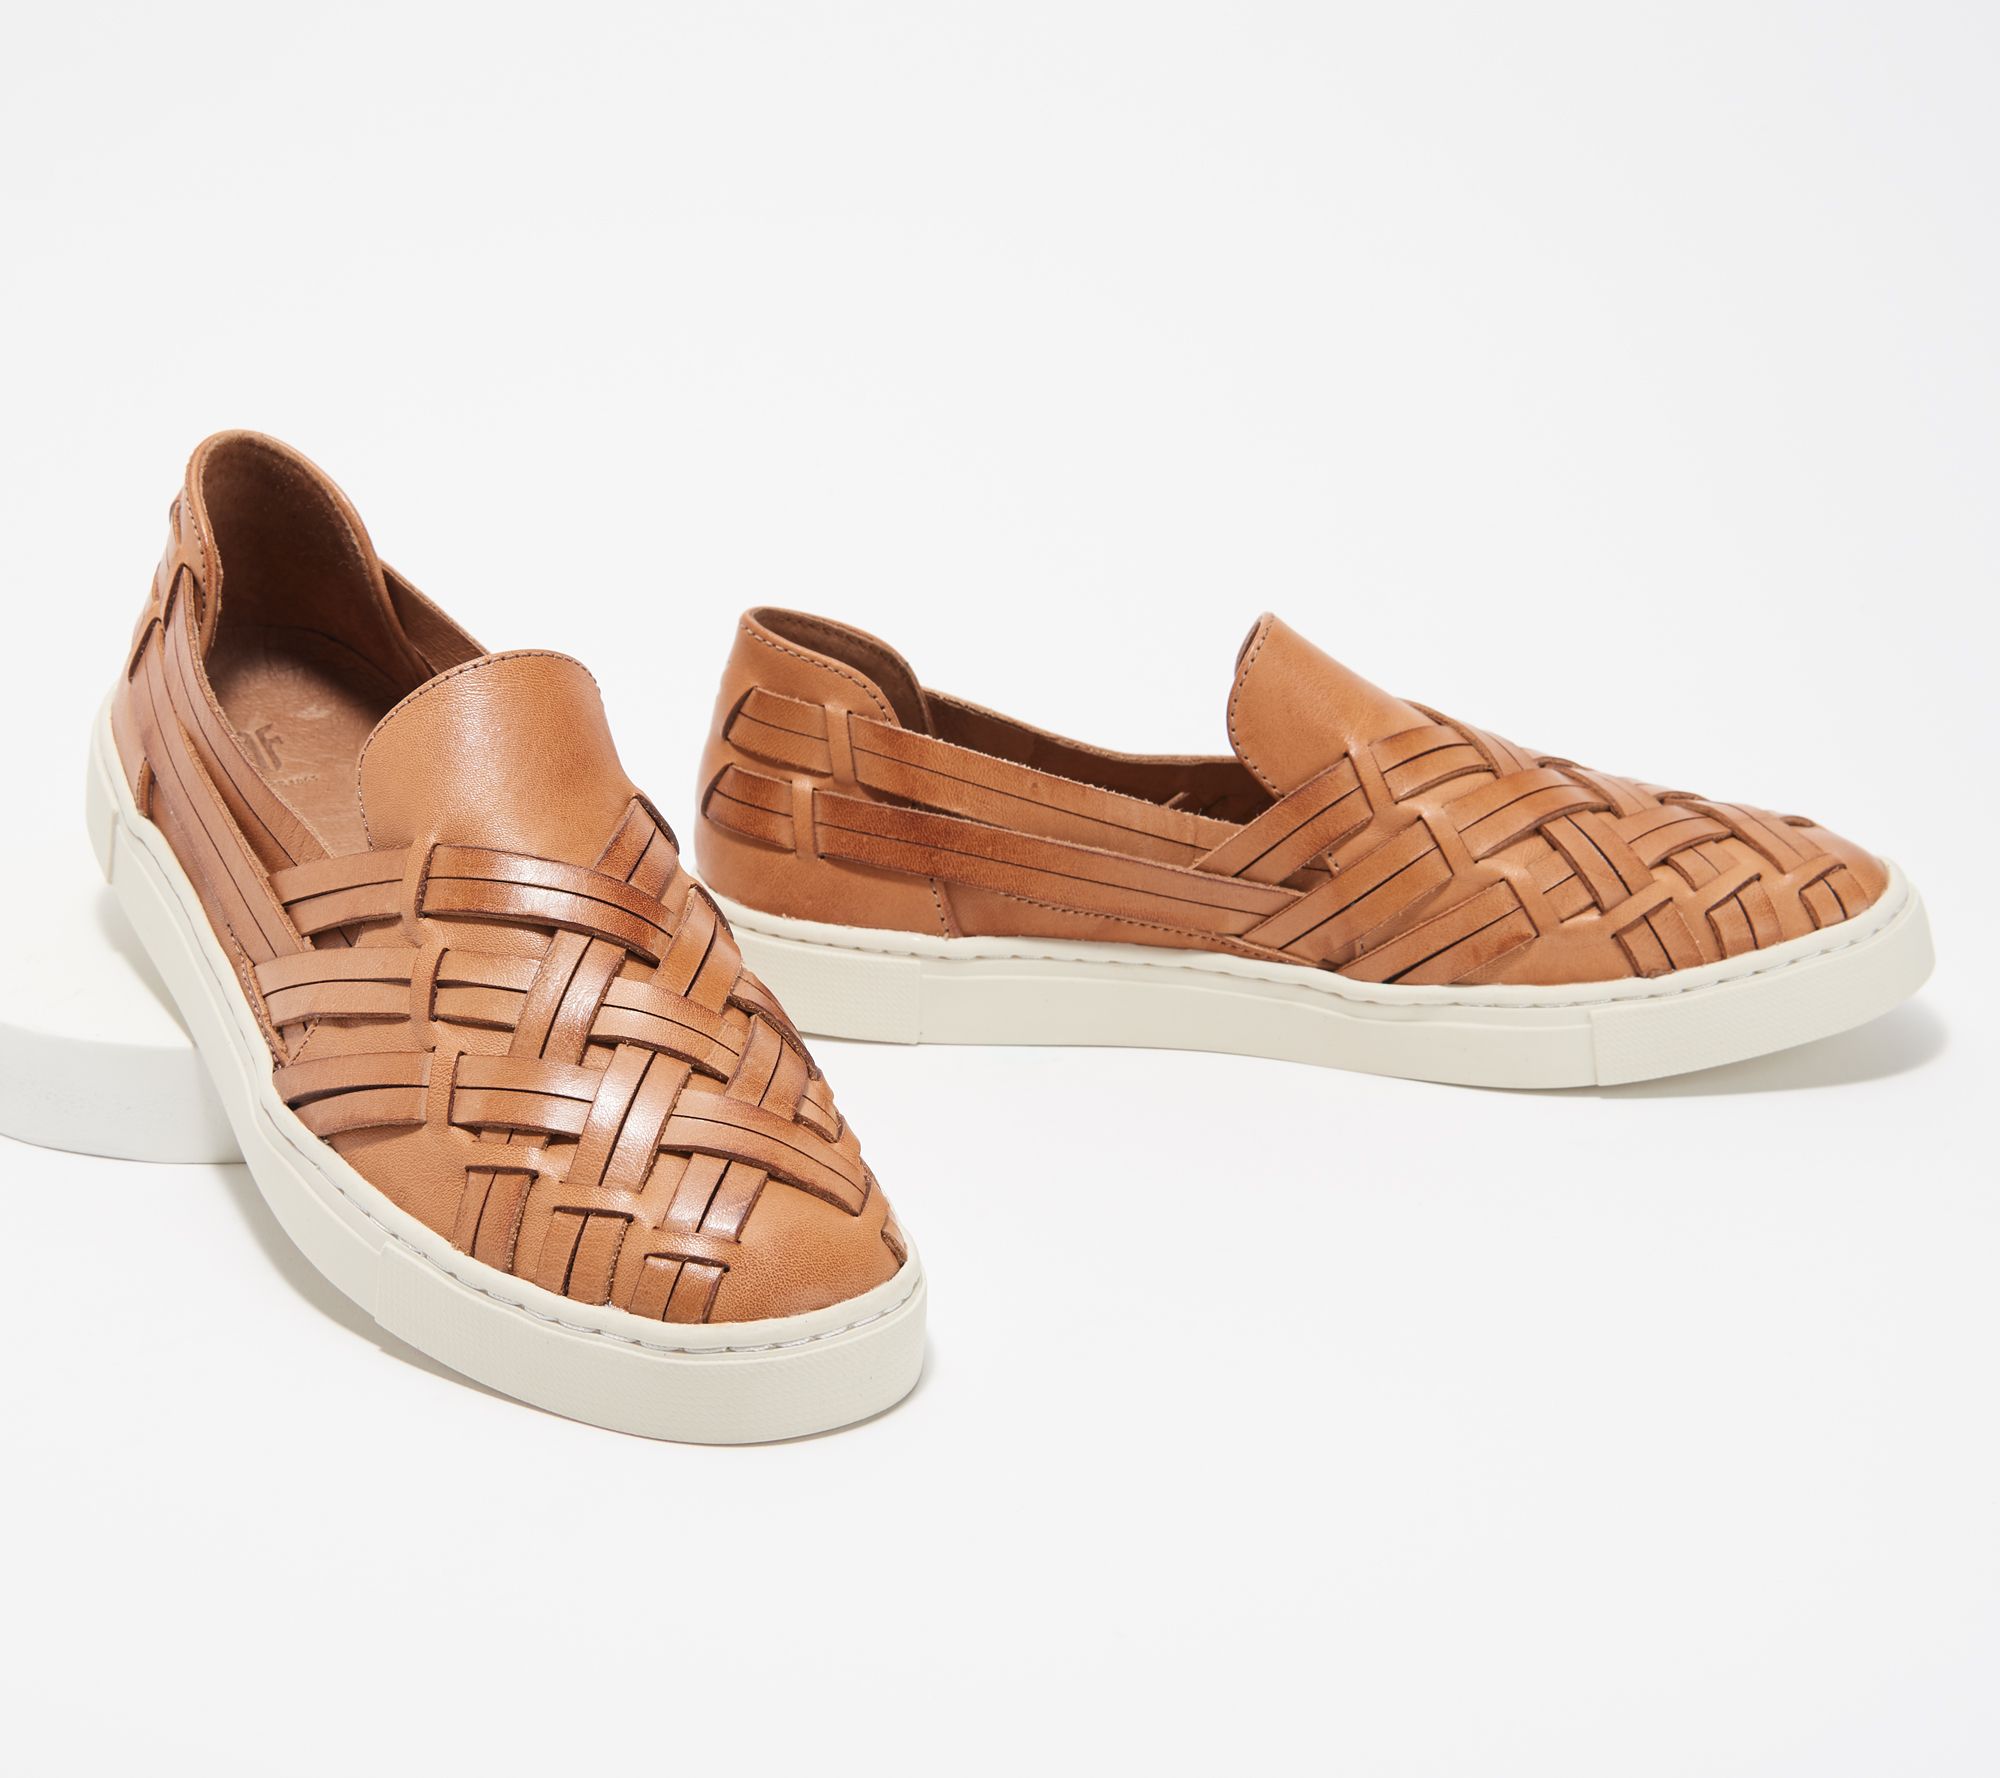 Frye Leather Slip-On Shoes - Ivy 